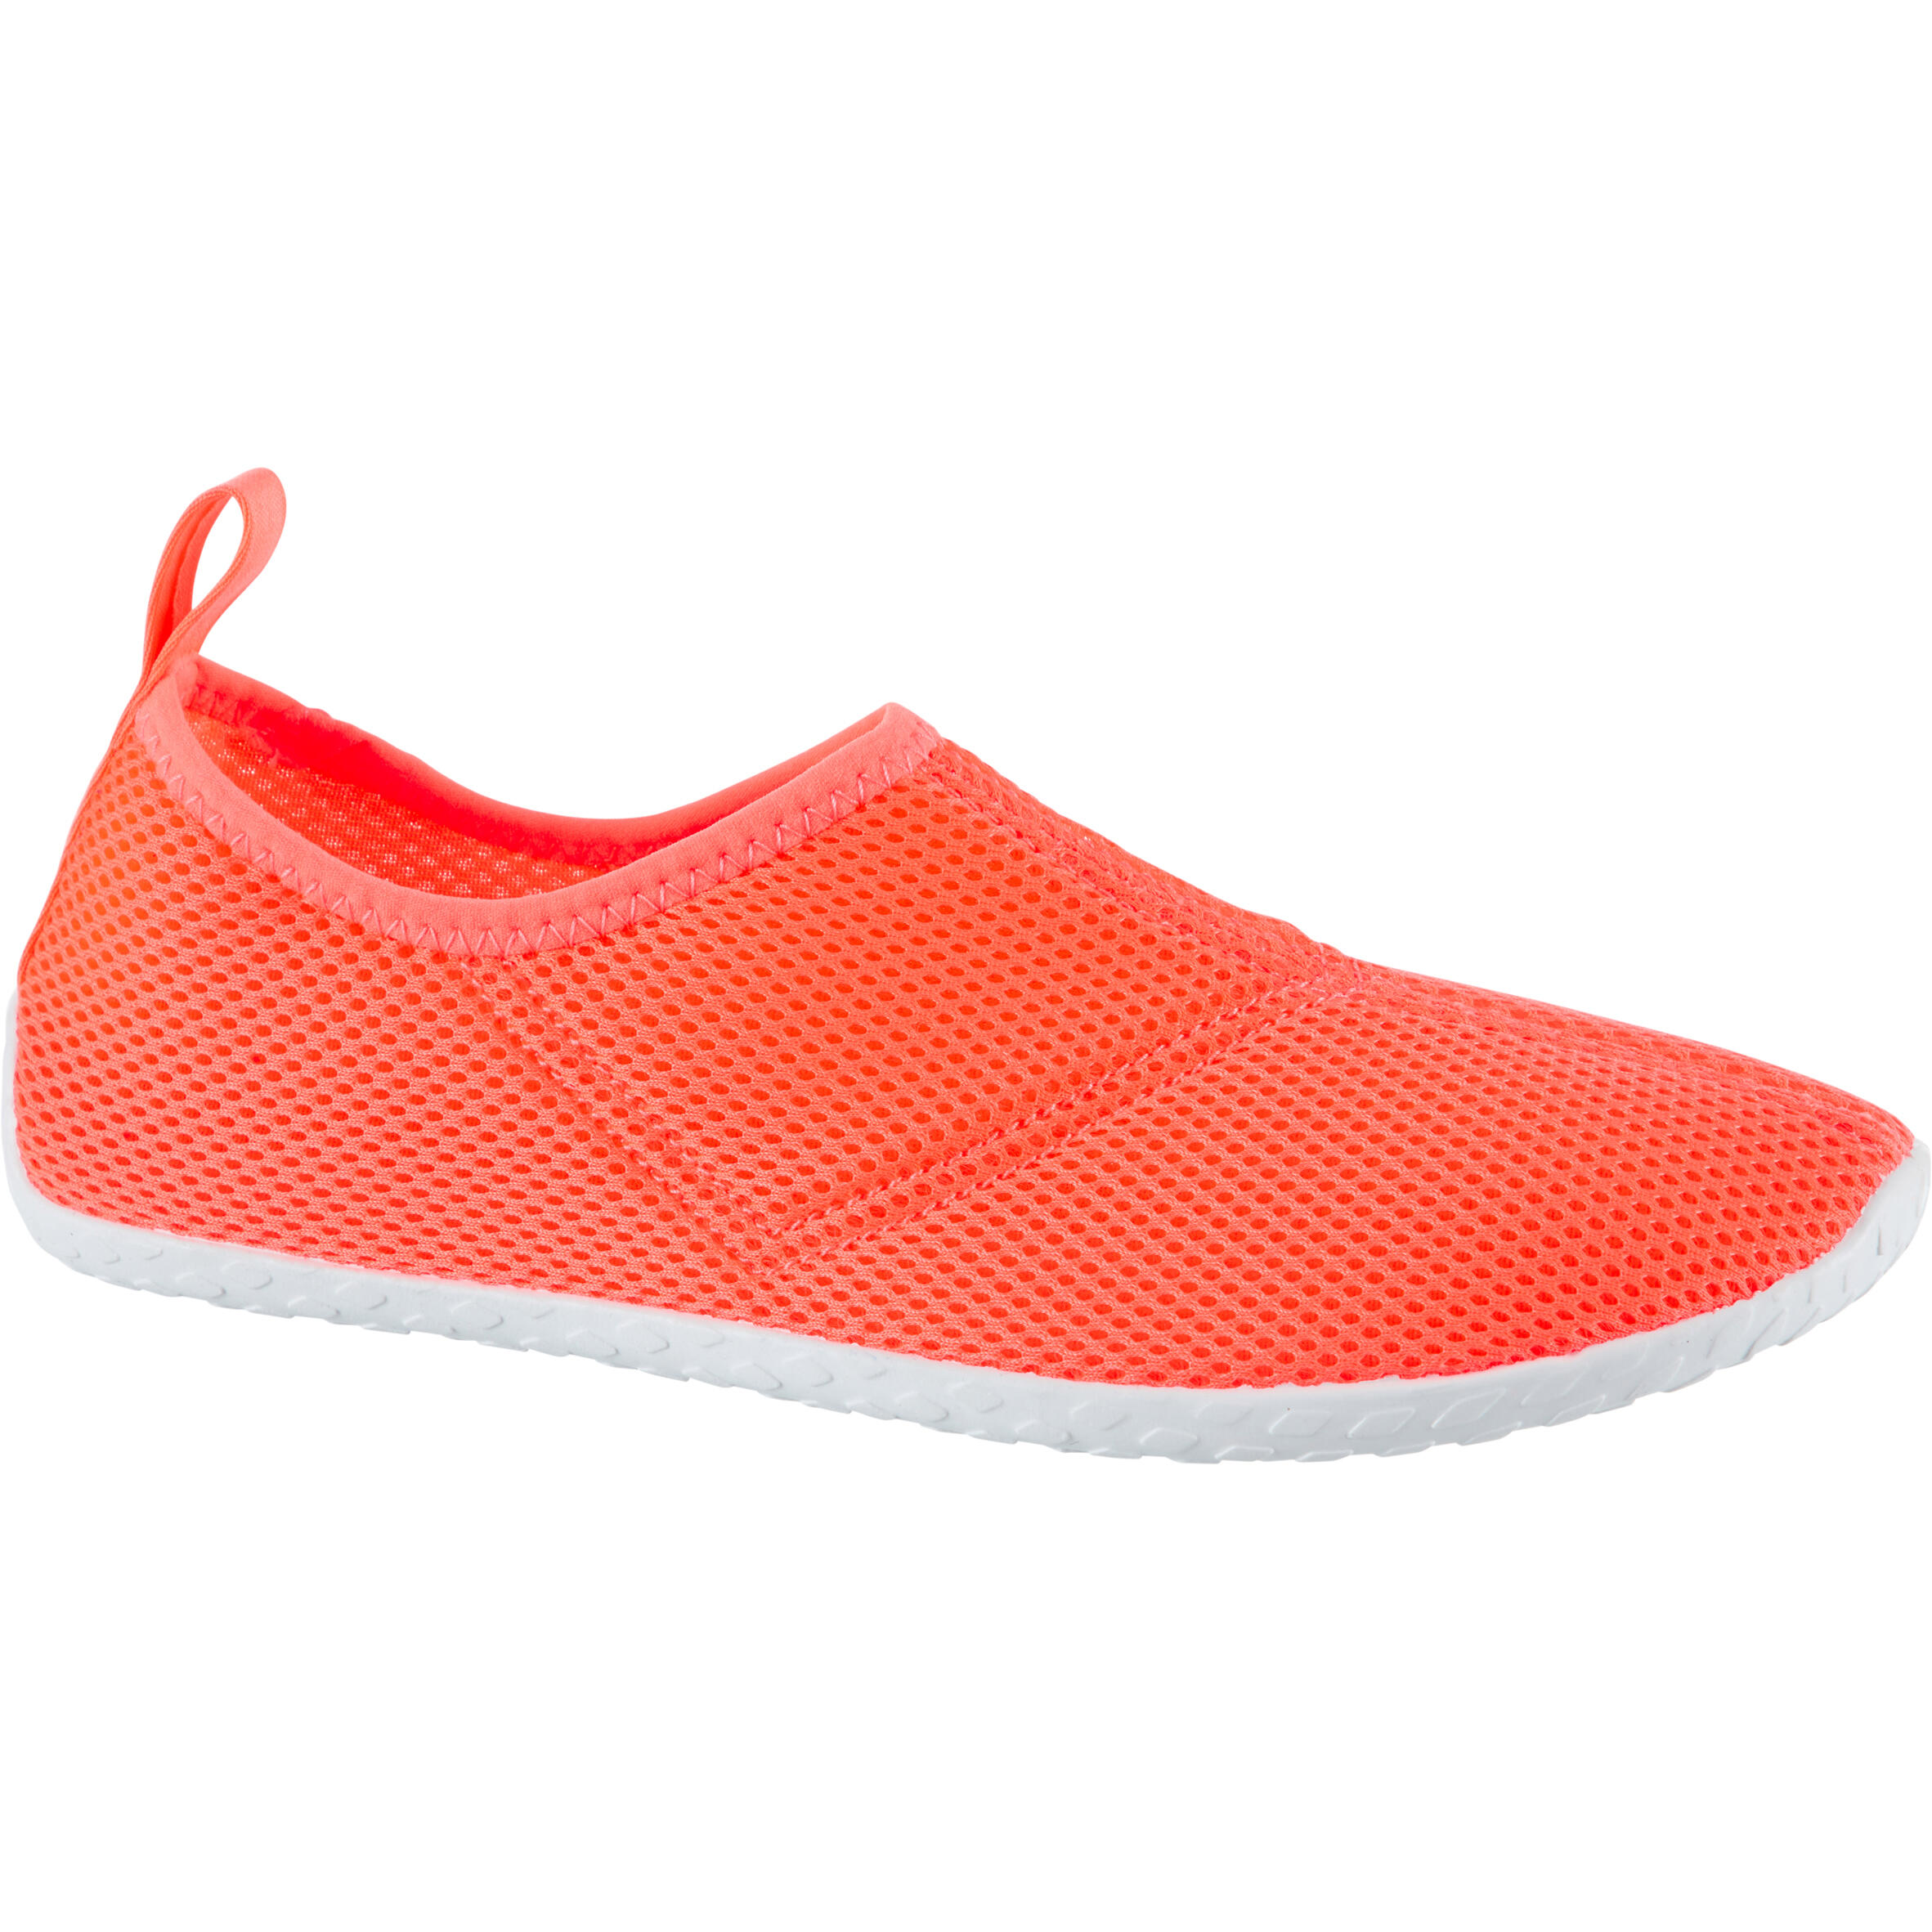 SUBEA Adult Water Shoes - Aquashoes 100 Coral